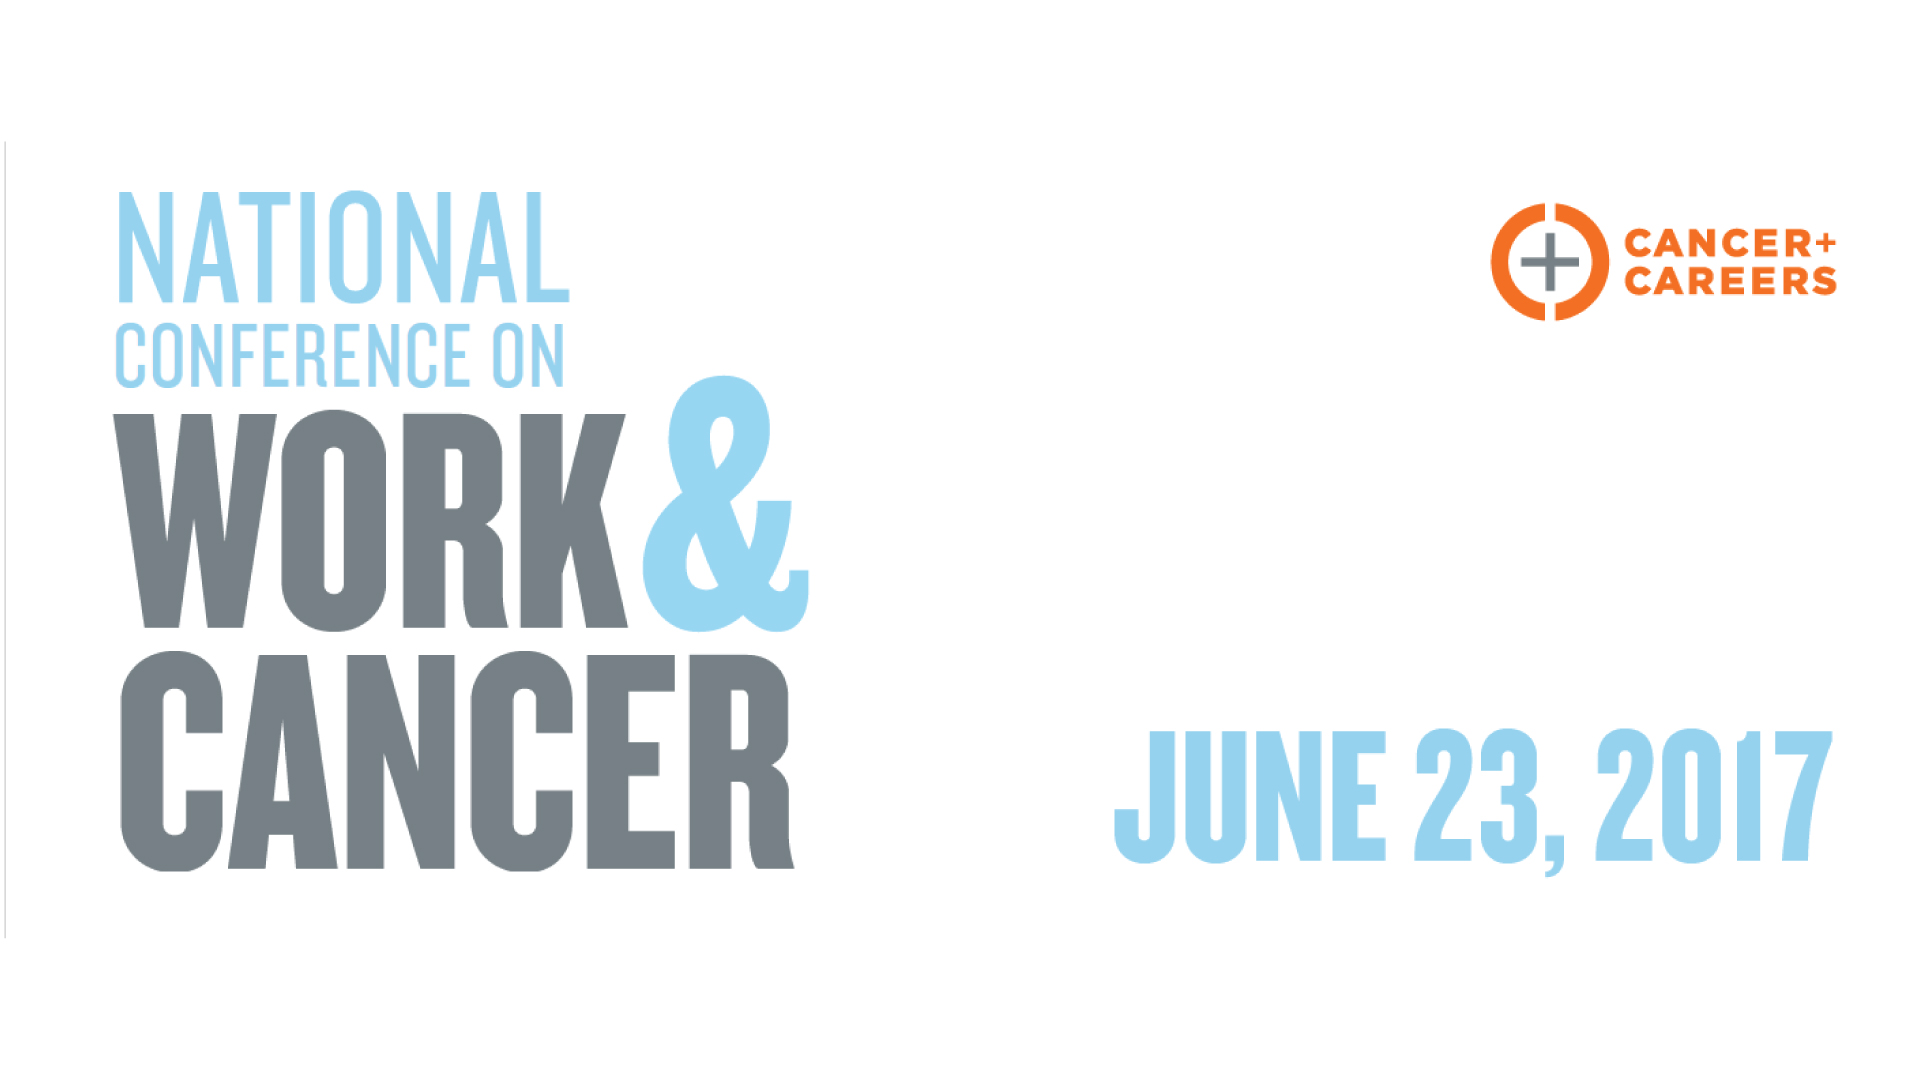 cancer and careers national conference